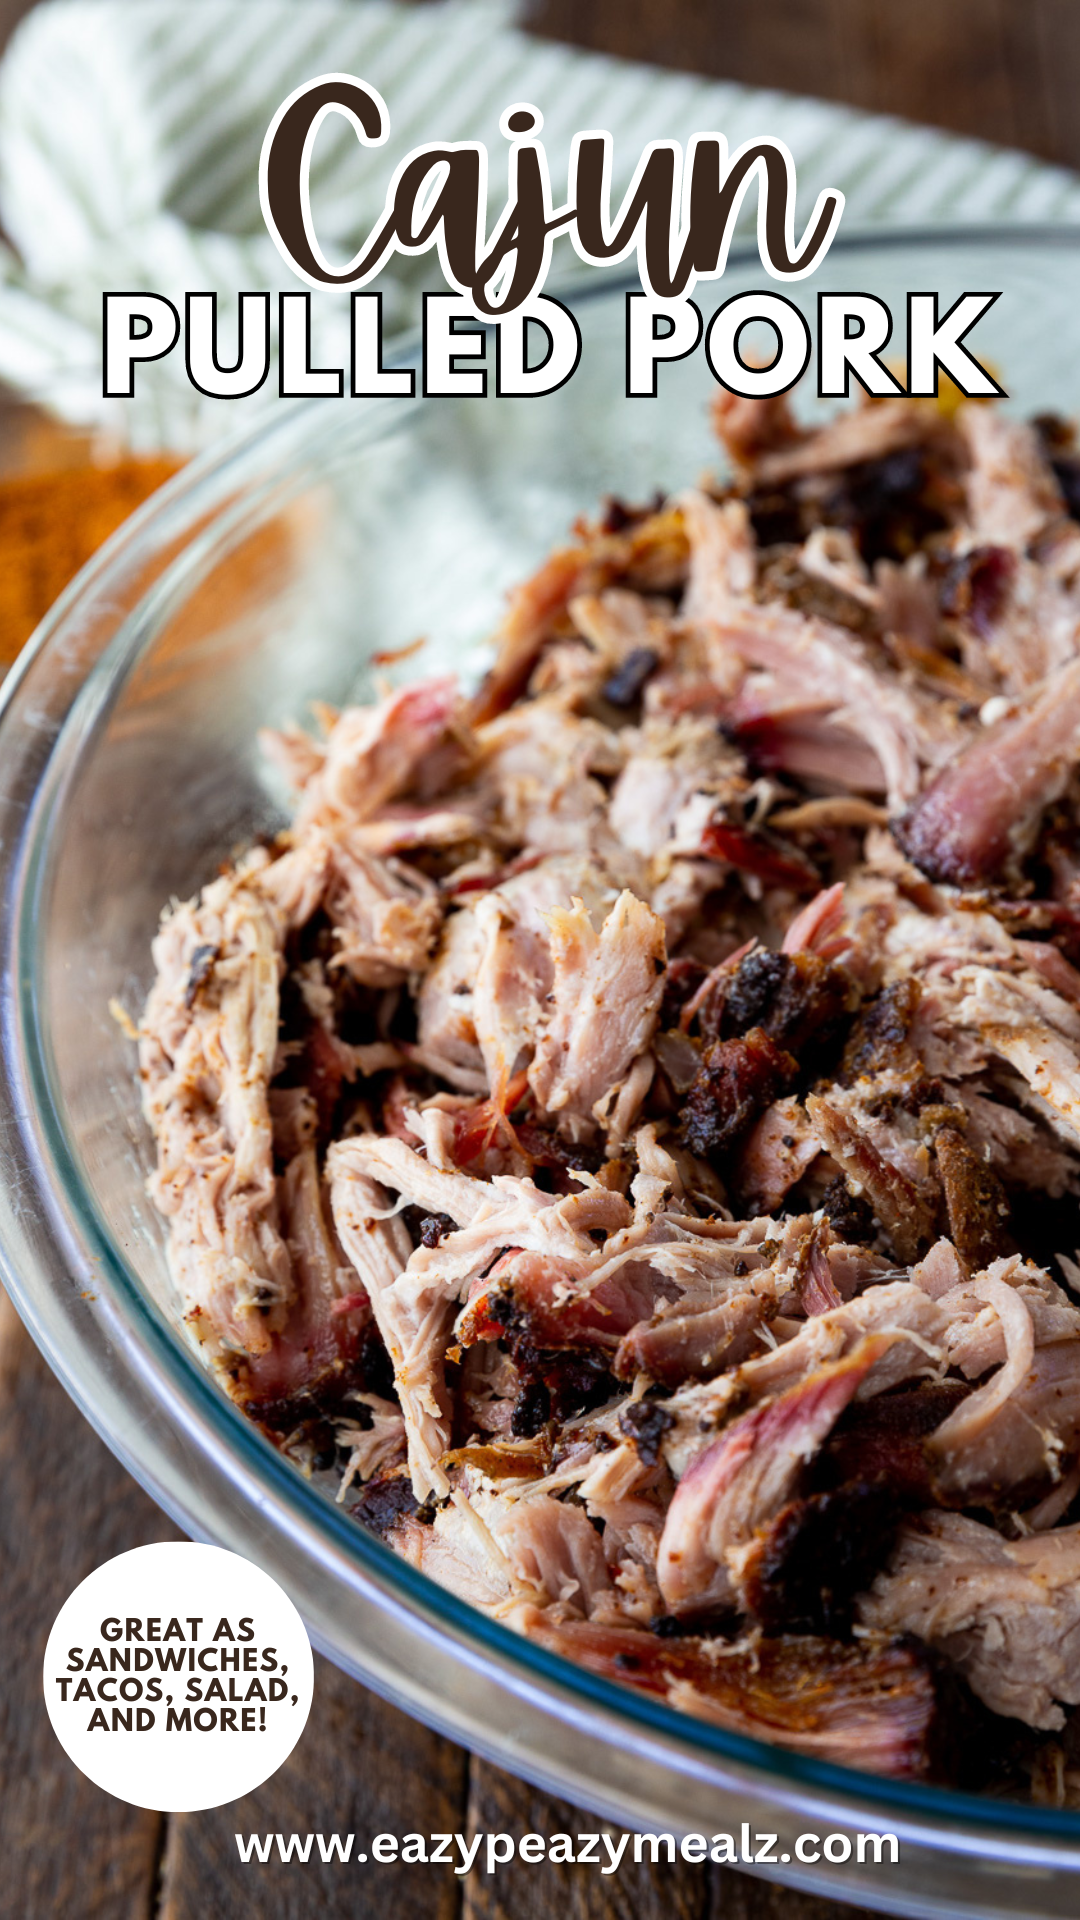 Cajun pulled pork. the best pulled pork, with amazing seasoning, and great flavor. Cooked on a pellet smoker until buttery soft and tender. 